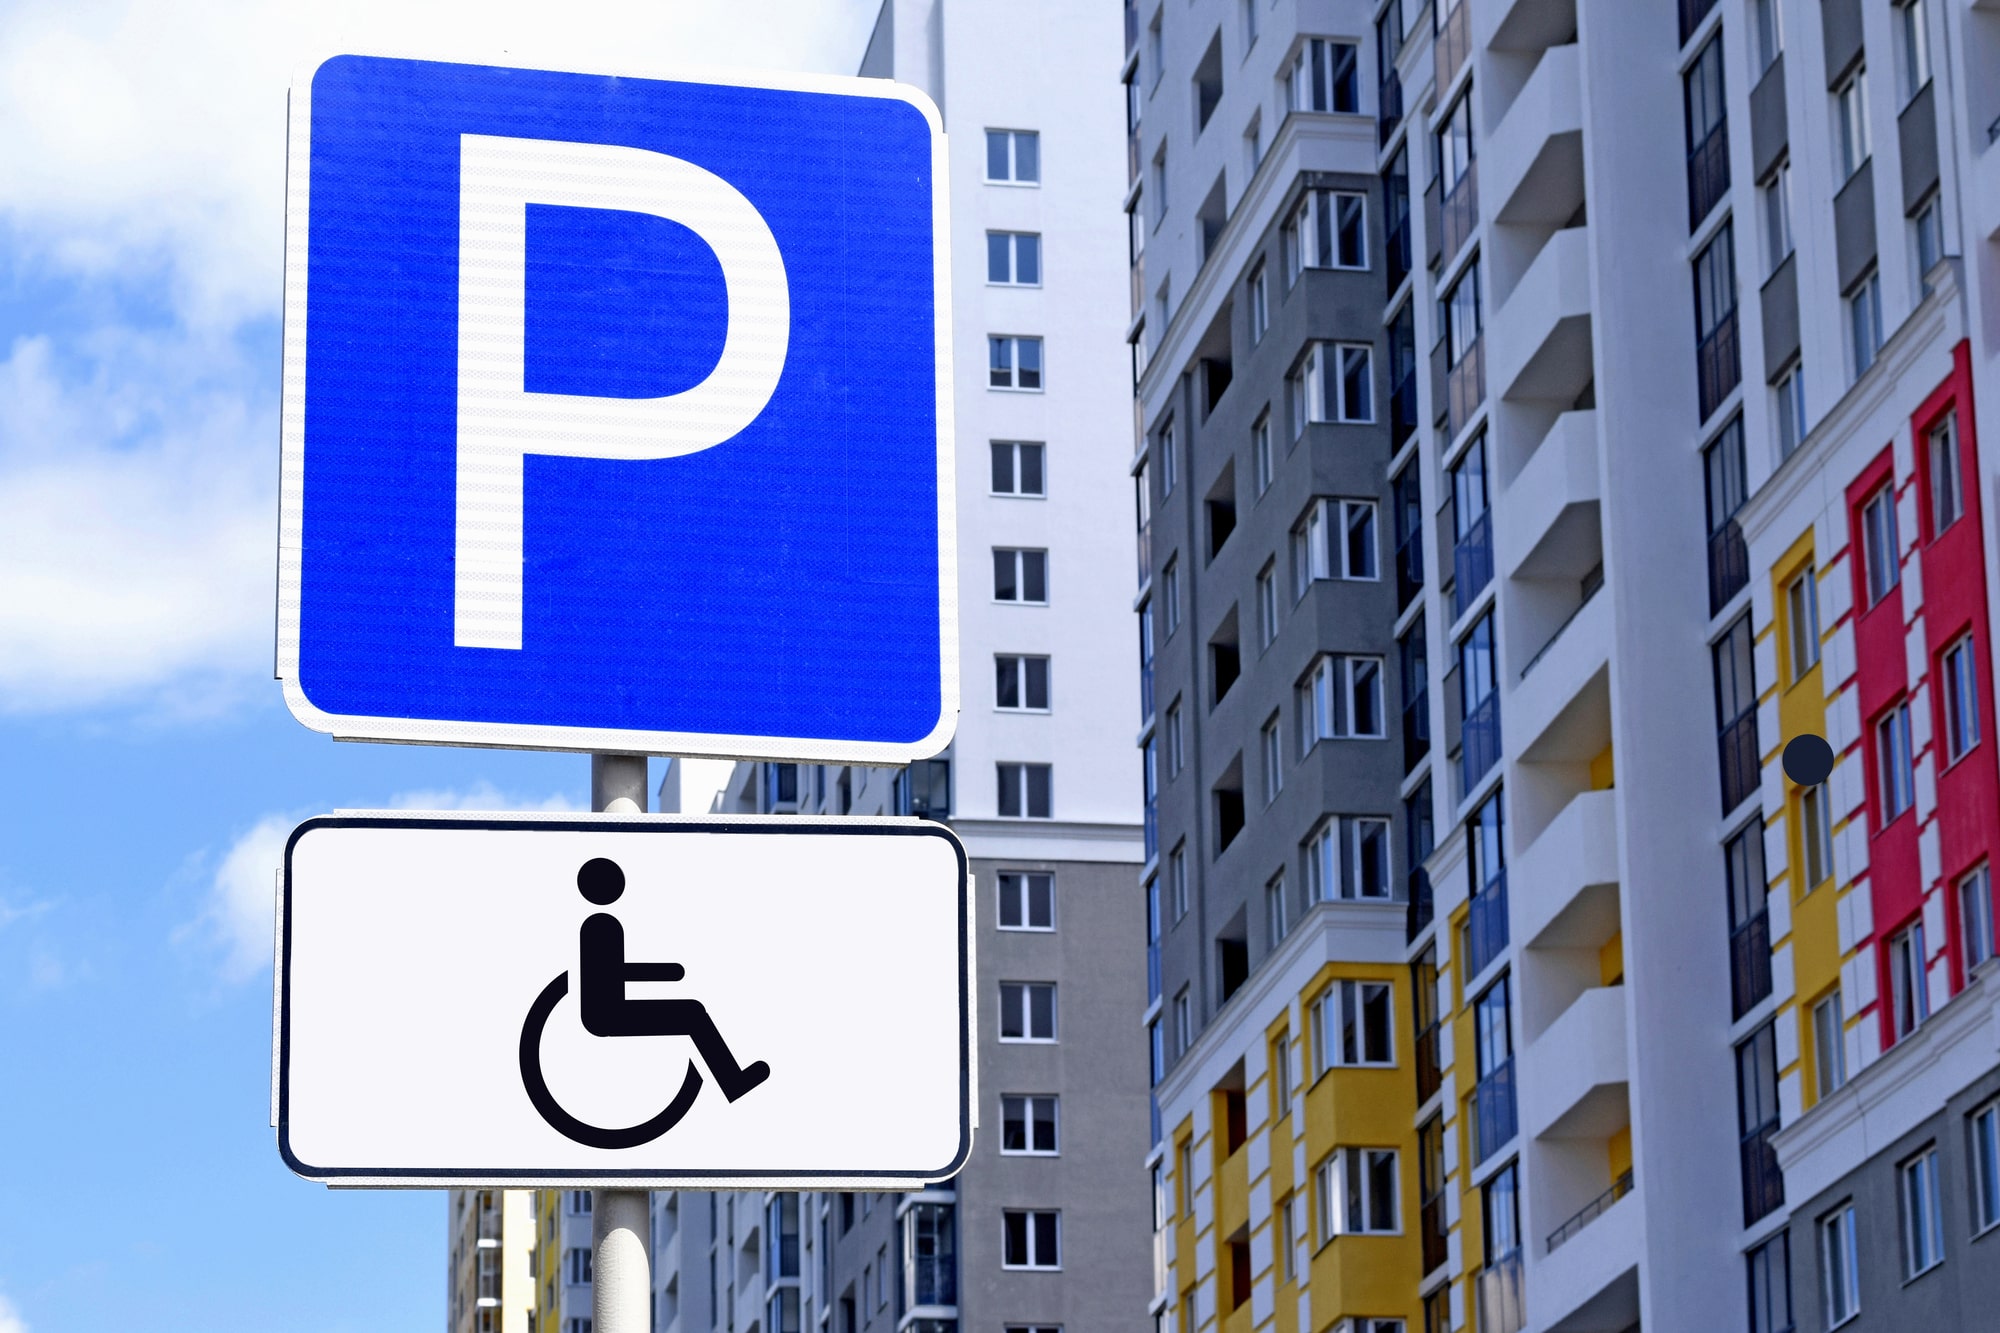 Designing for Accessibility: How Parking Lot Signage Can Improve ADA Compliance